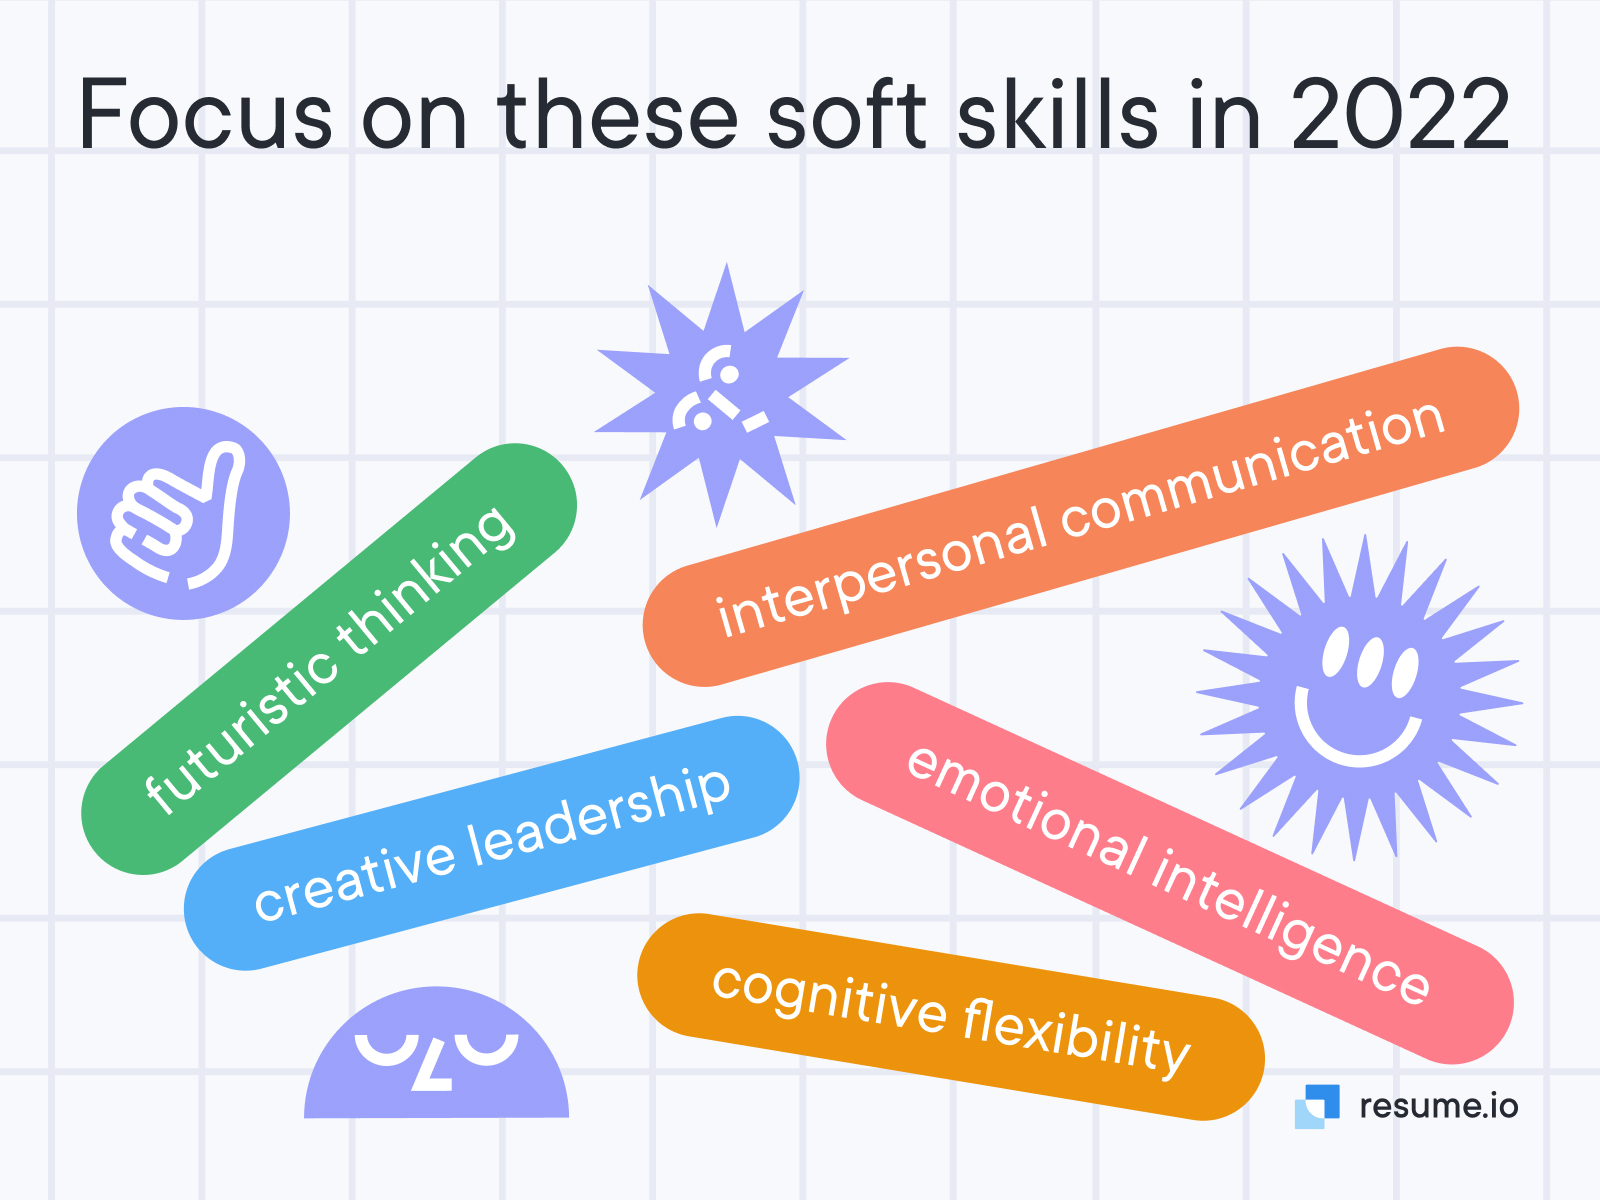 Focus on these soft skills in 2022